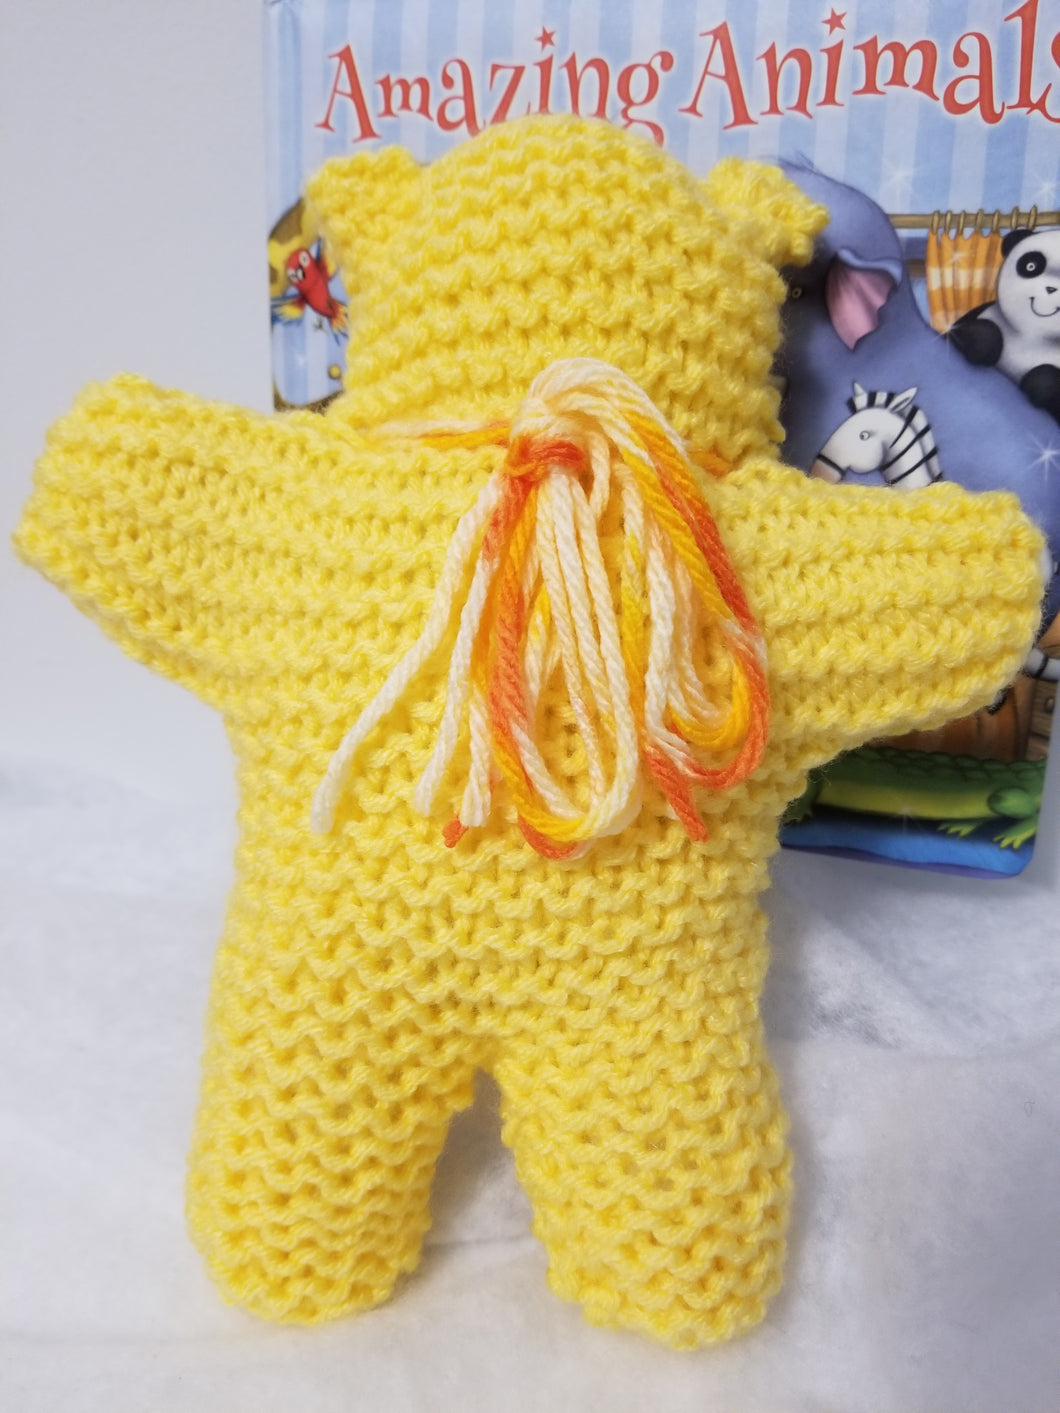 Cozy Teddy is approximately 8 inches high and 6 inches across arms. A simple little teddy for decoration or play. Many colors available.